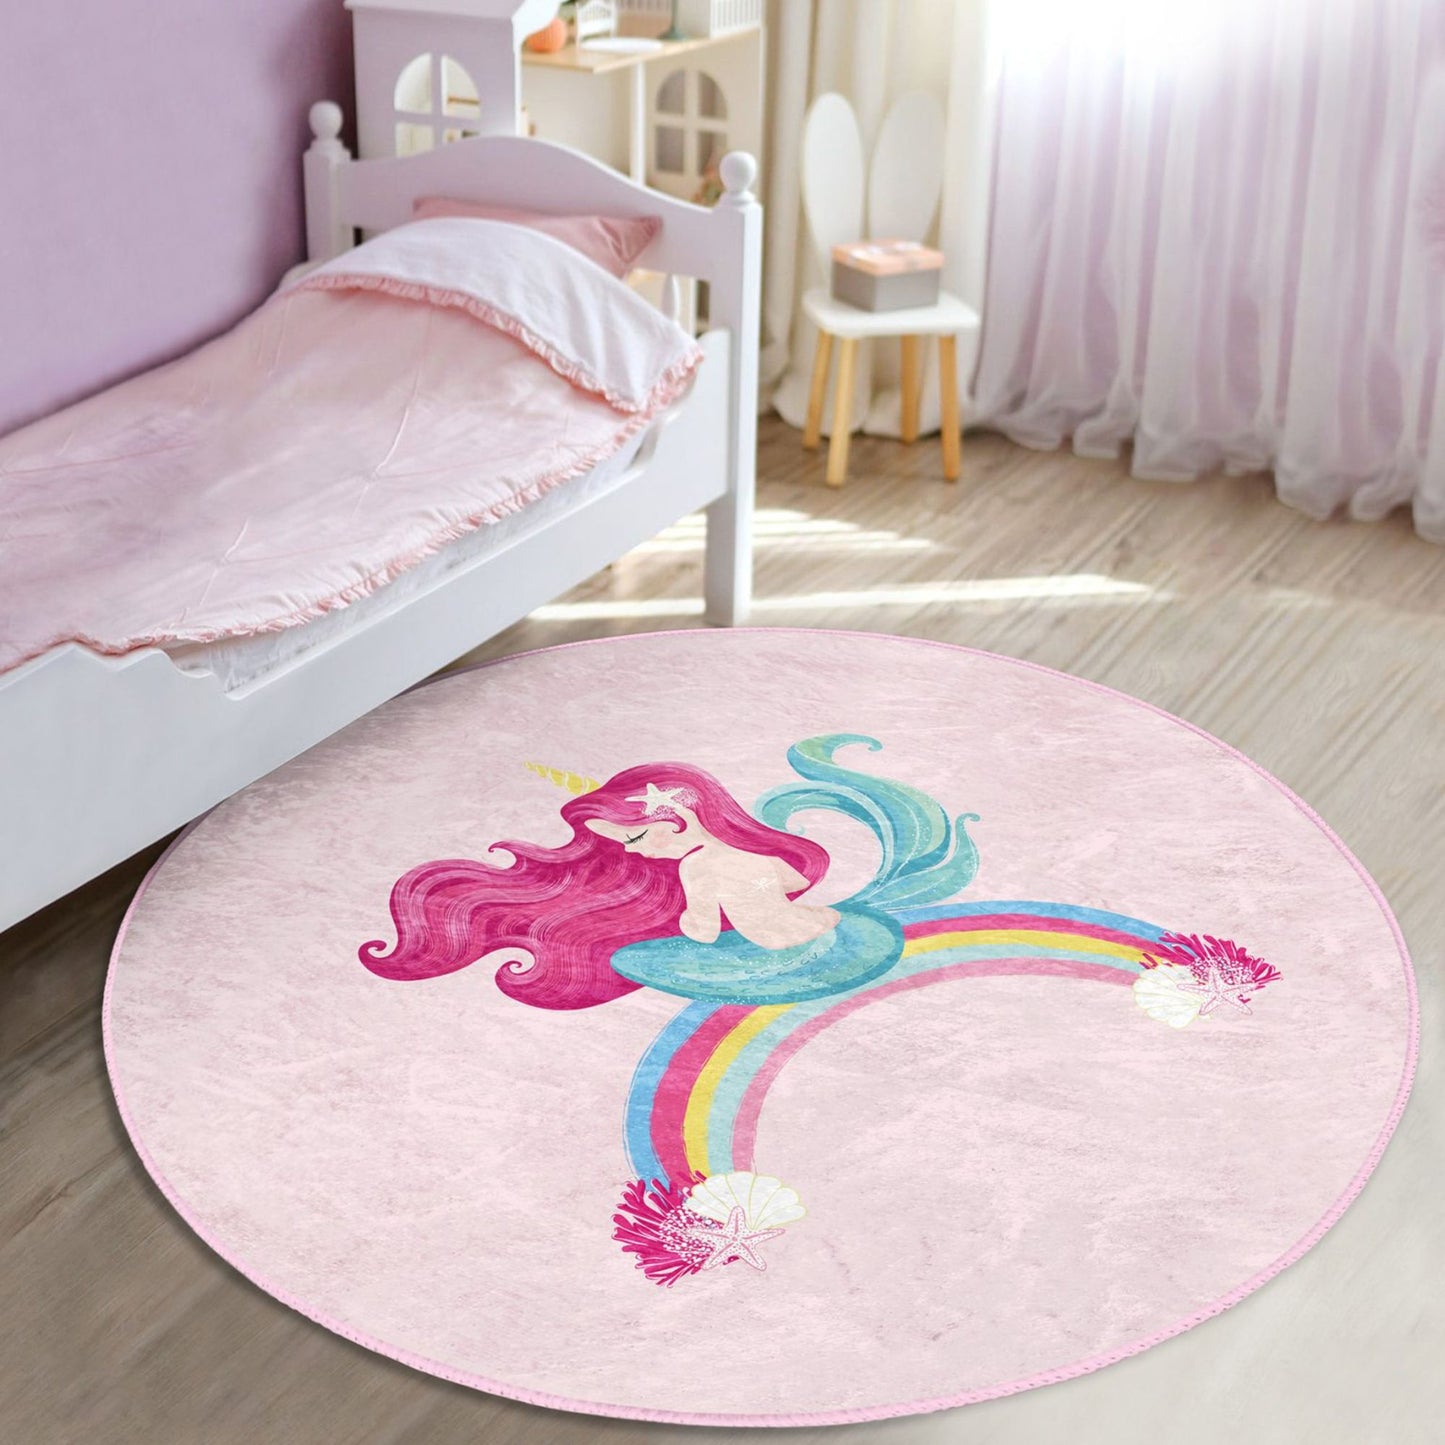 Durable Pink Rug for Children's Bedroom or Playroom